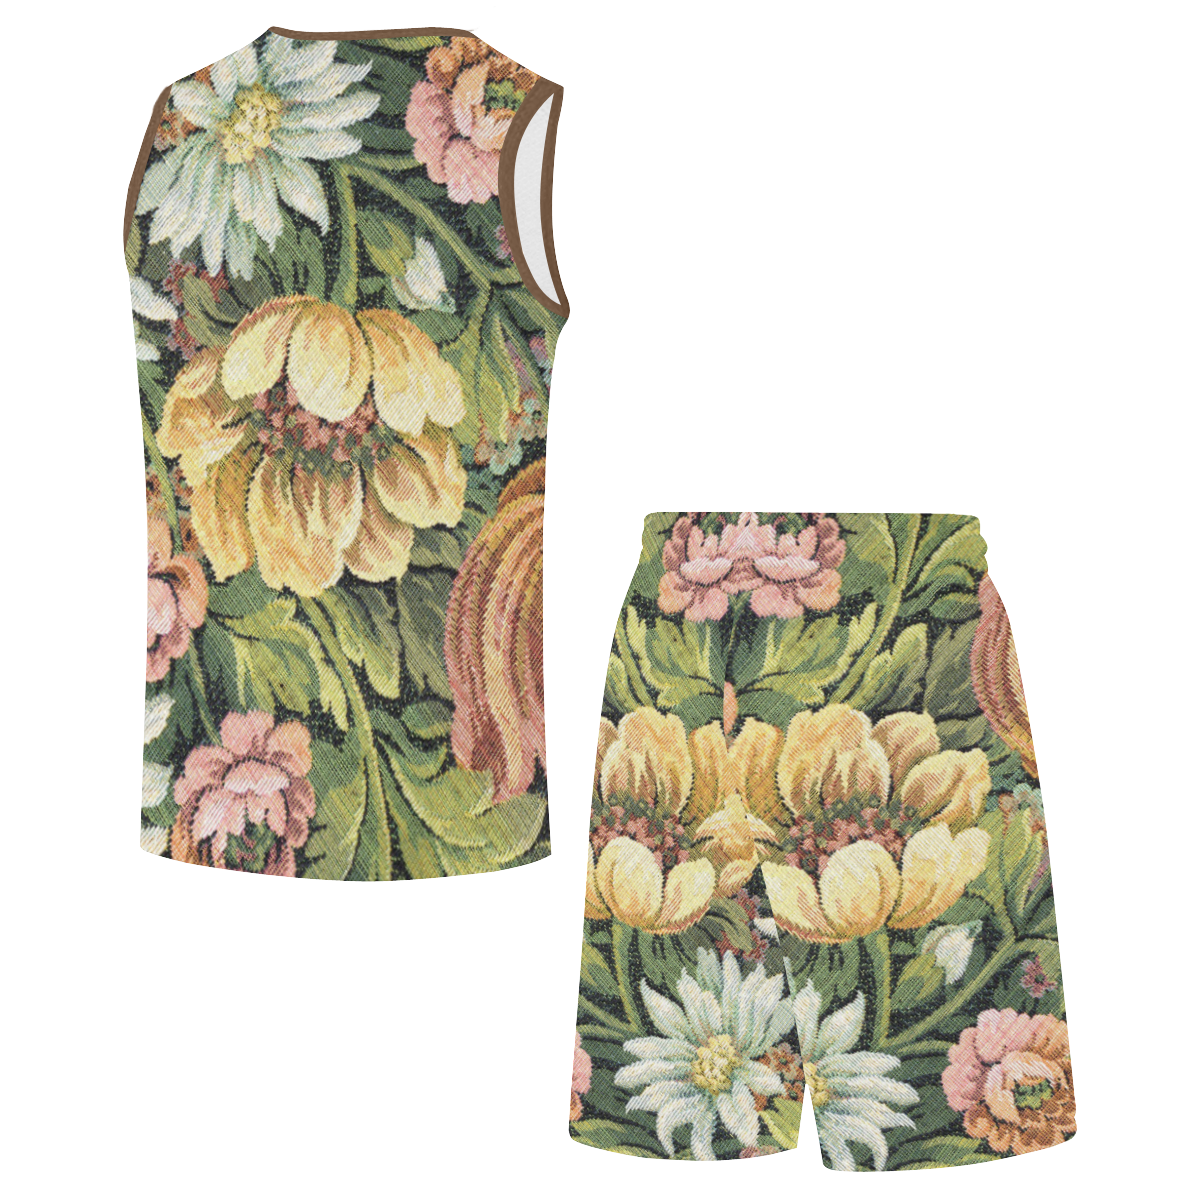 grandma's vintage floral couch All Over Print Basketball Uniform